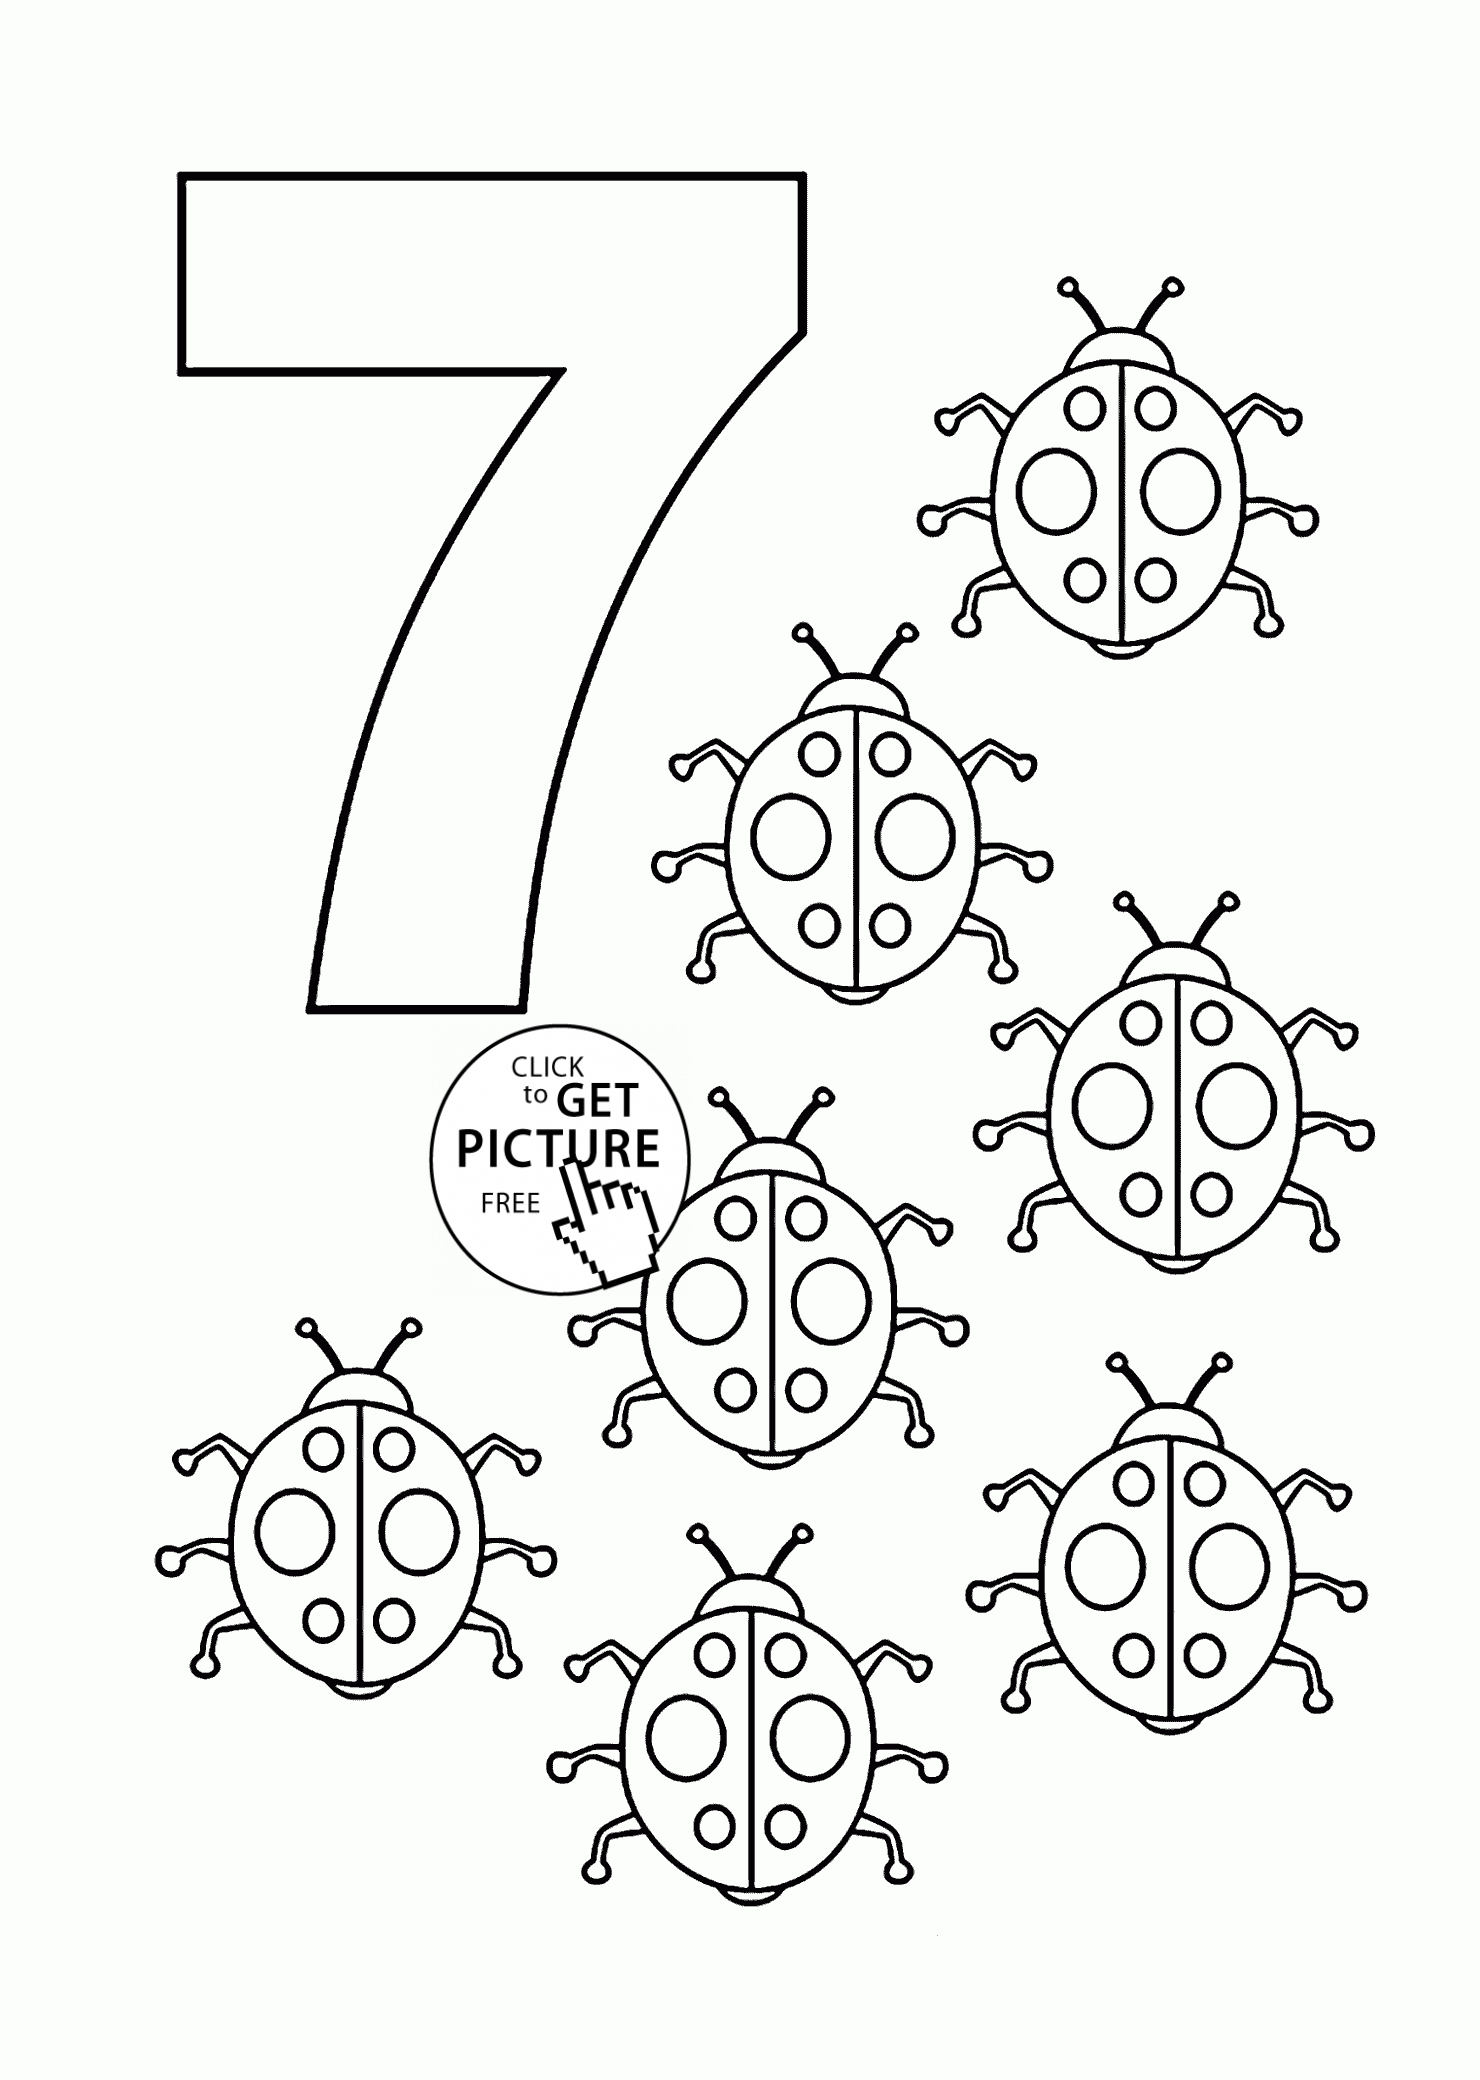 colouring picture of number 7 color the number 7 coloring page twisty noodle of picture number colouring 7 